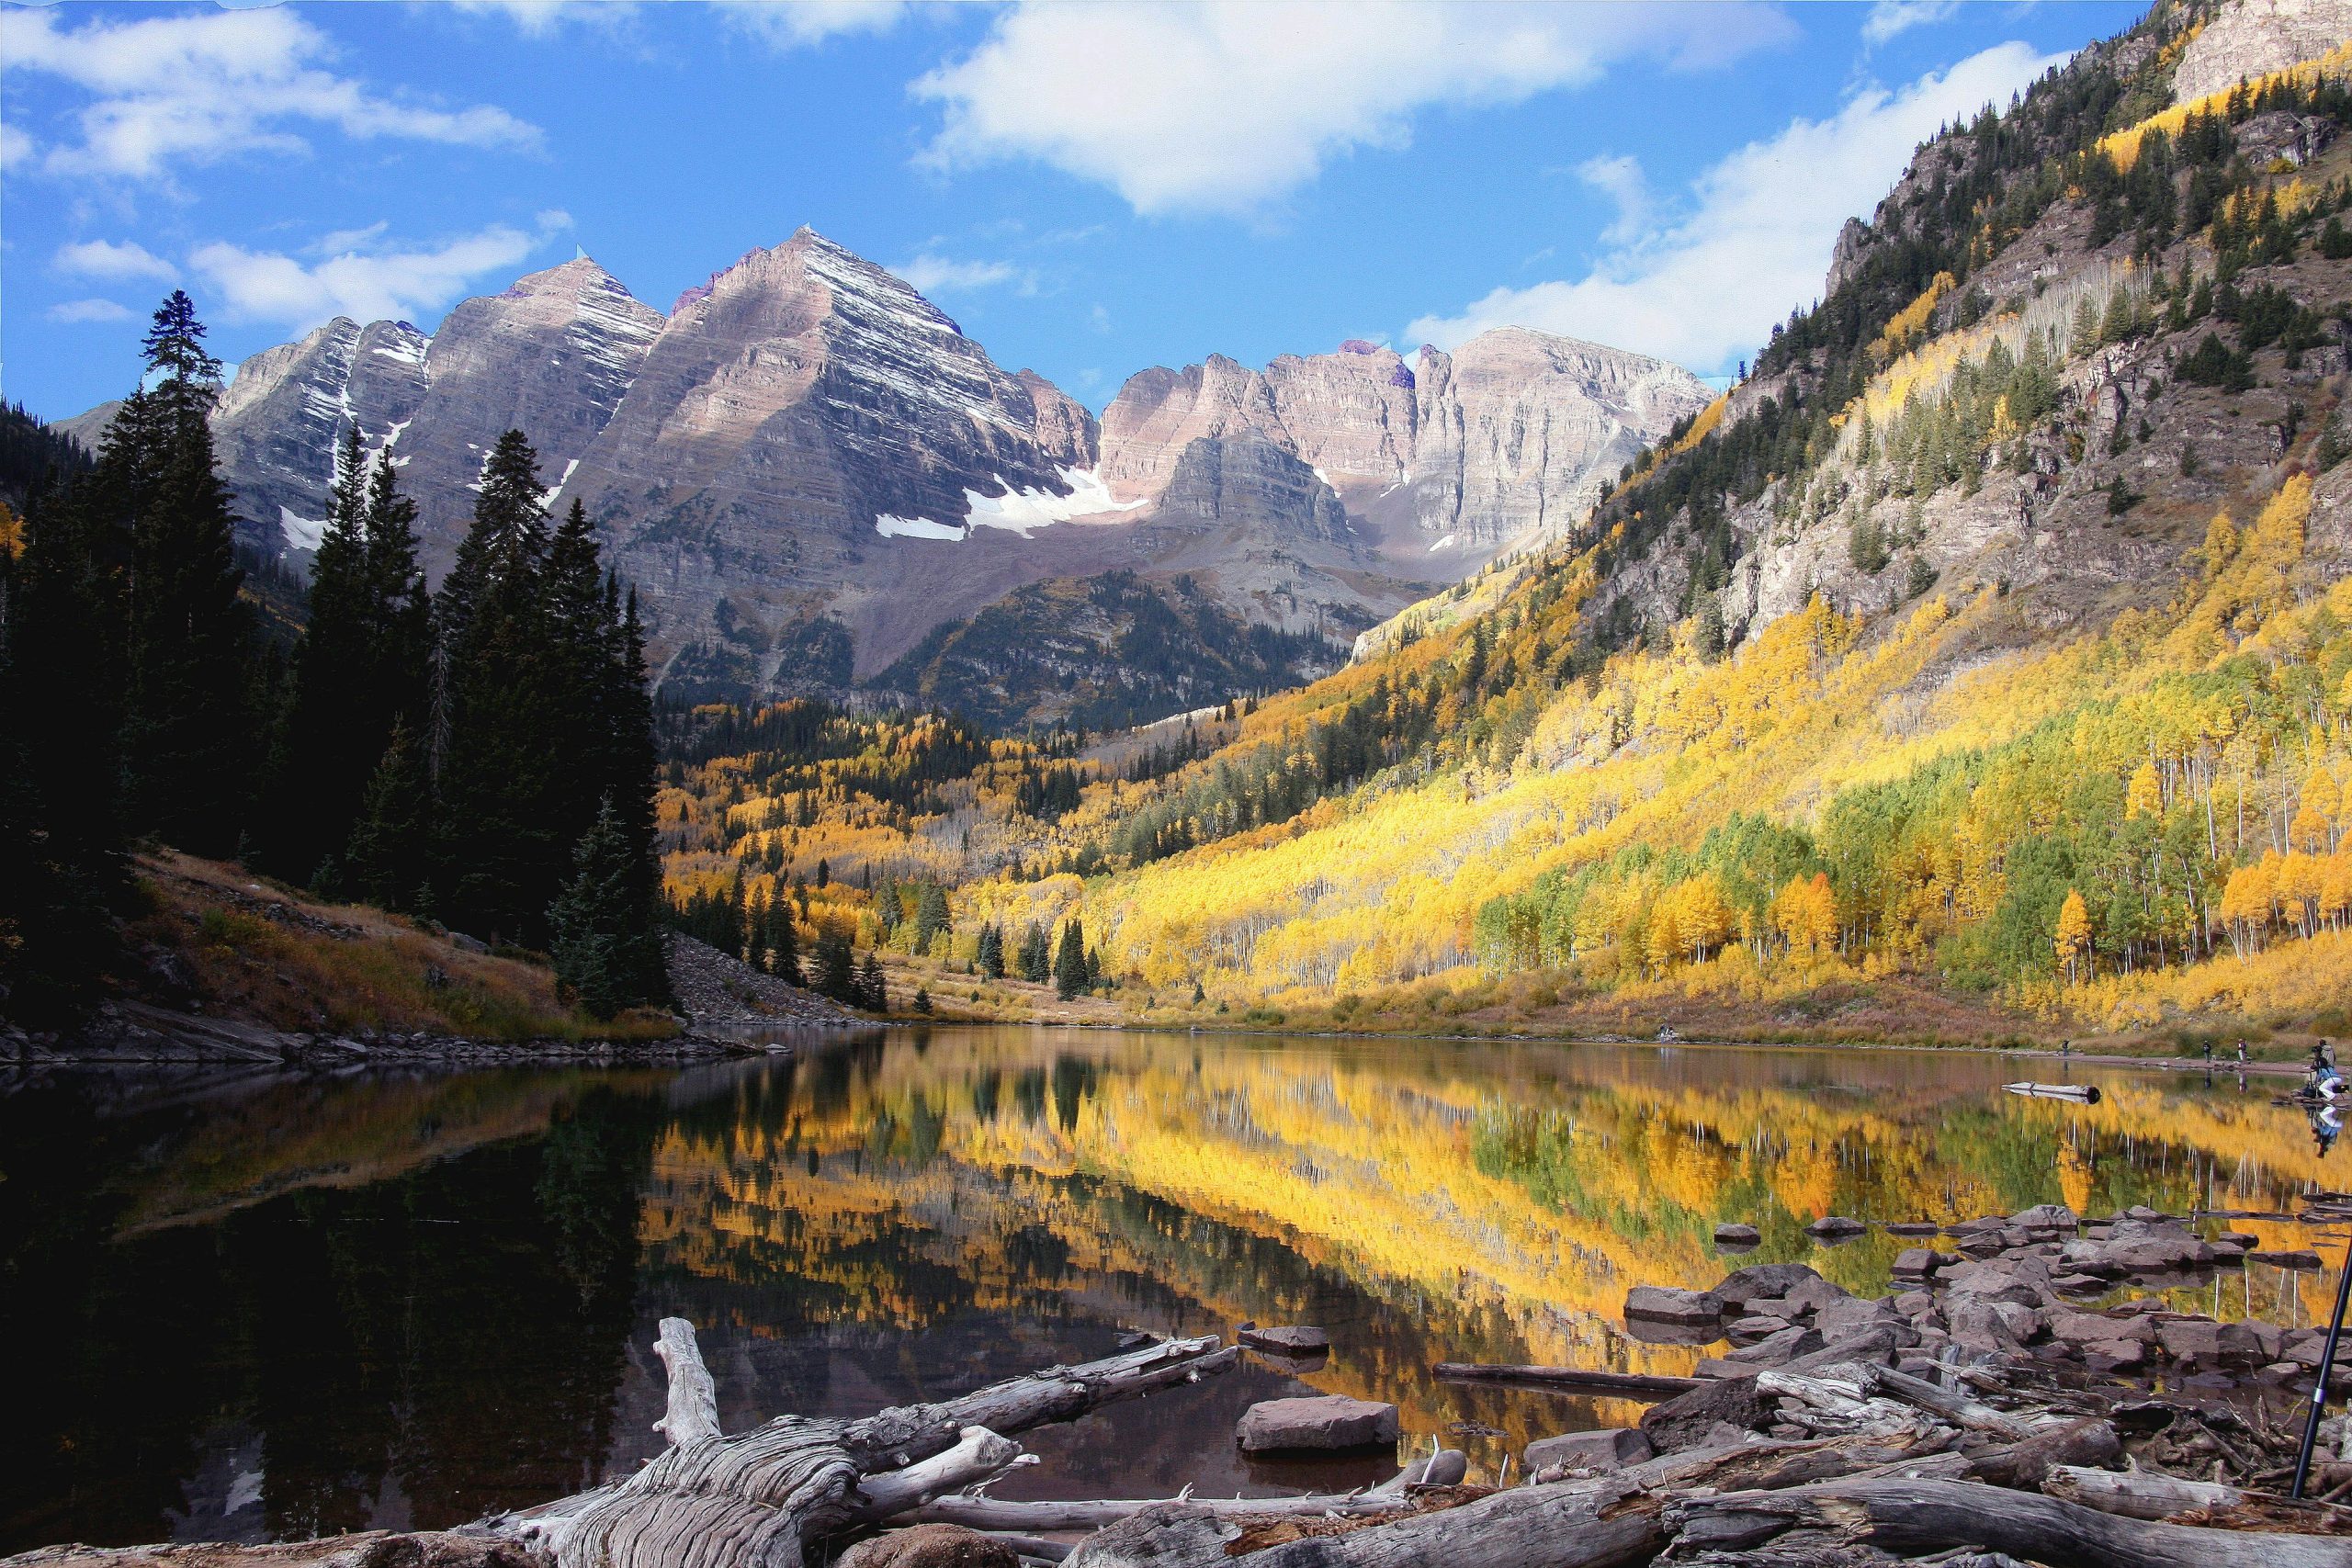 A photograph of Maroon Bells, Colorado, behind aspen trees changing colors during fall.